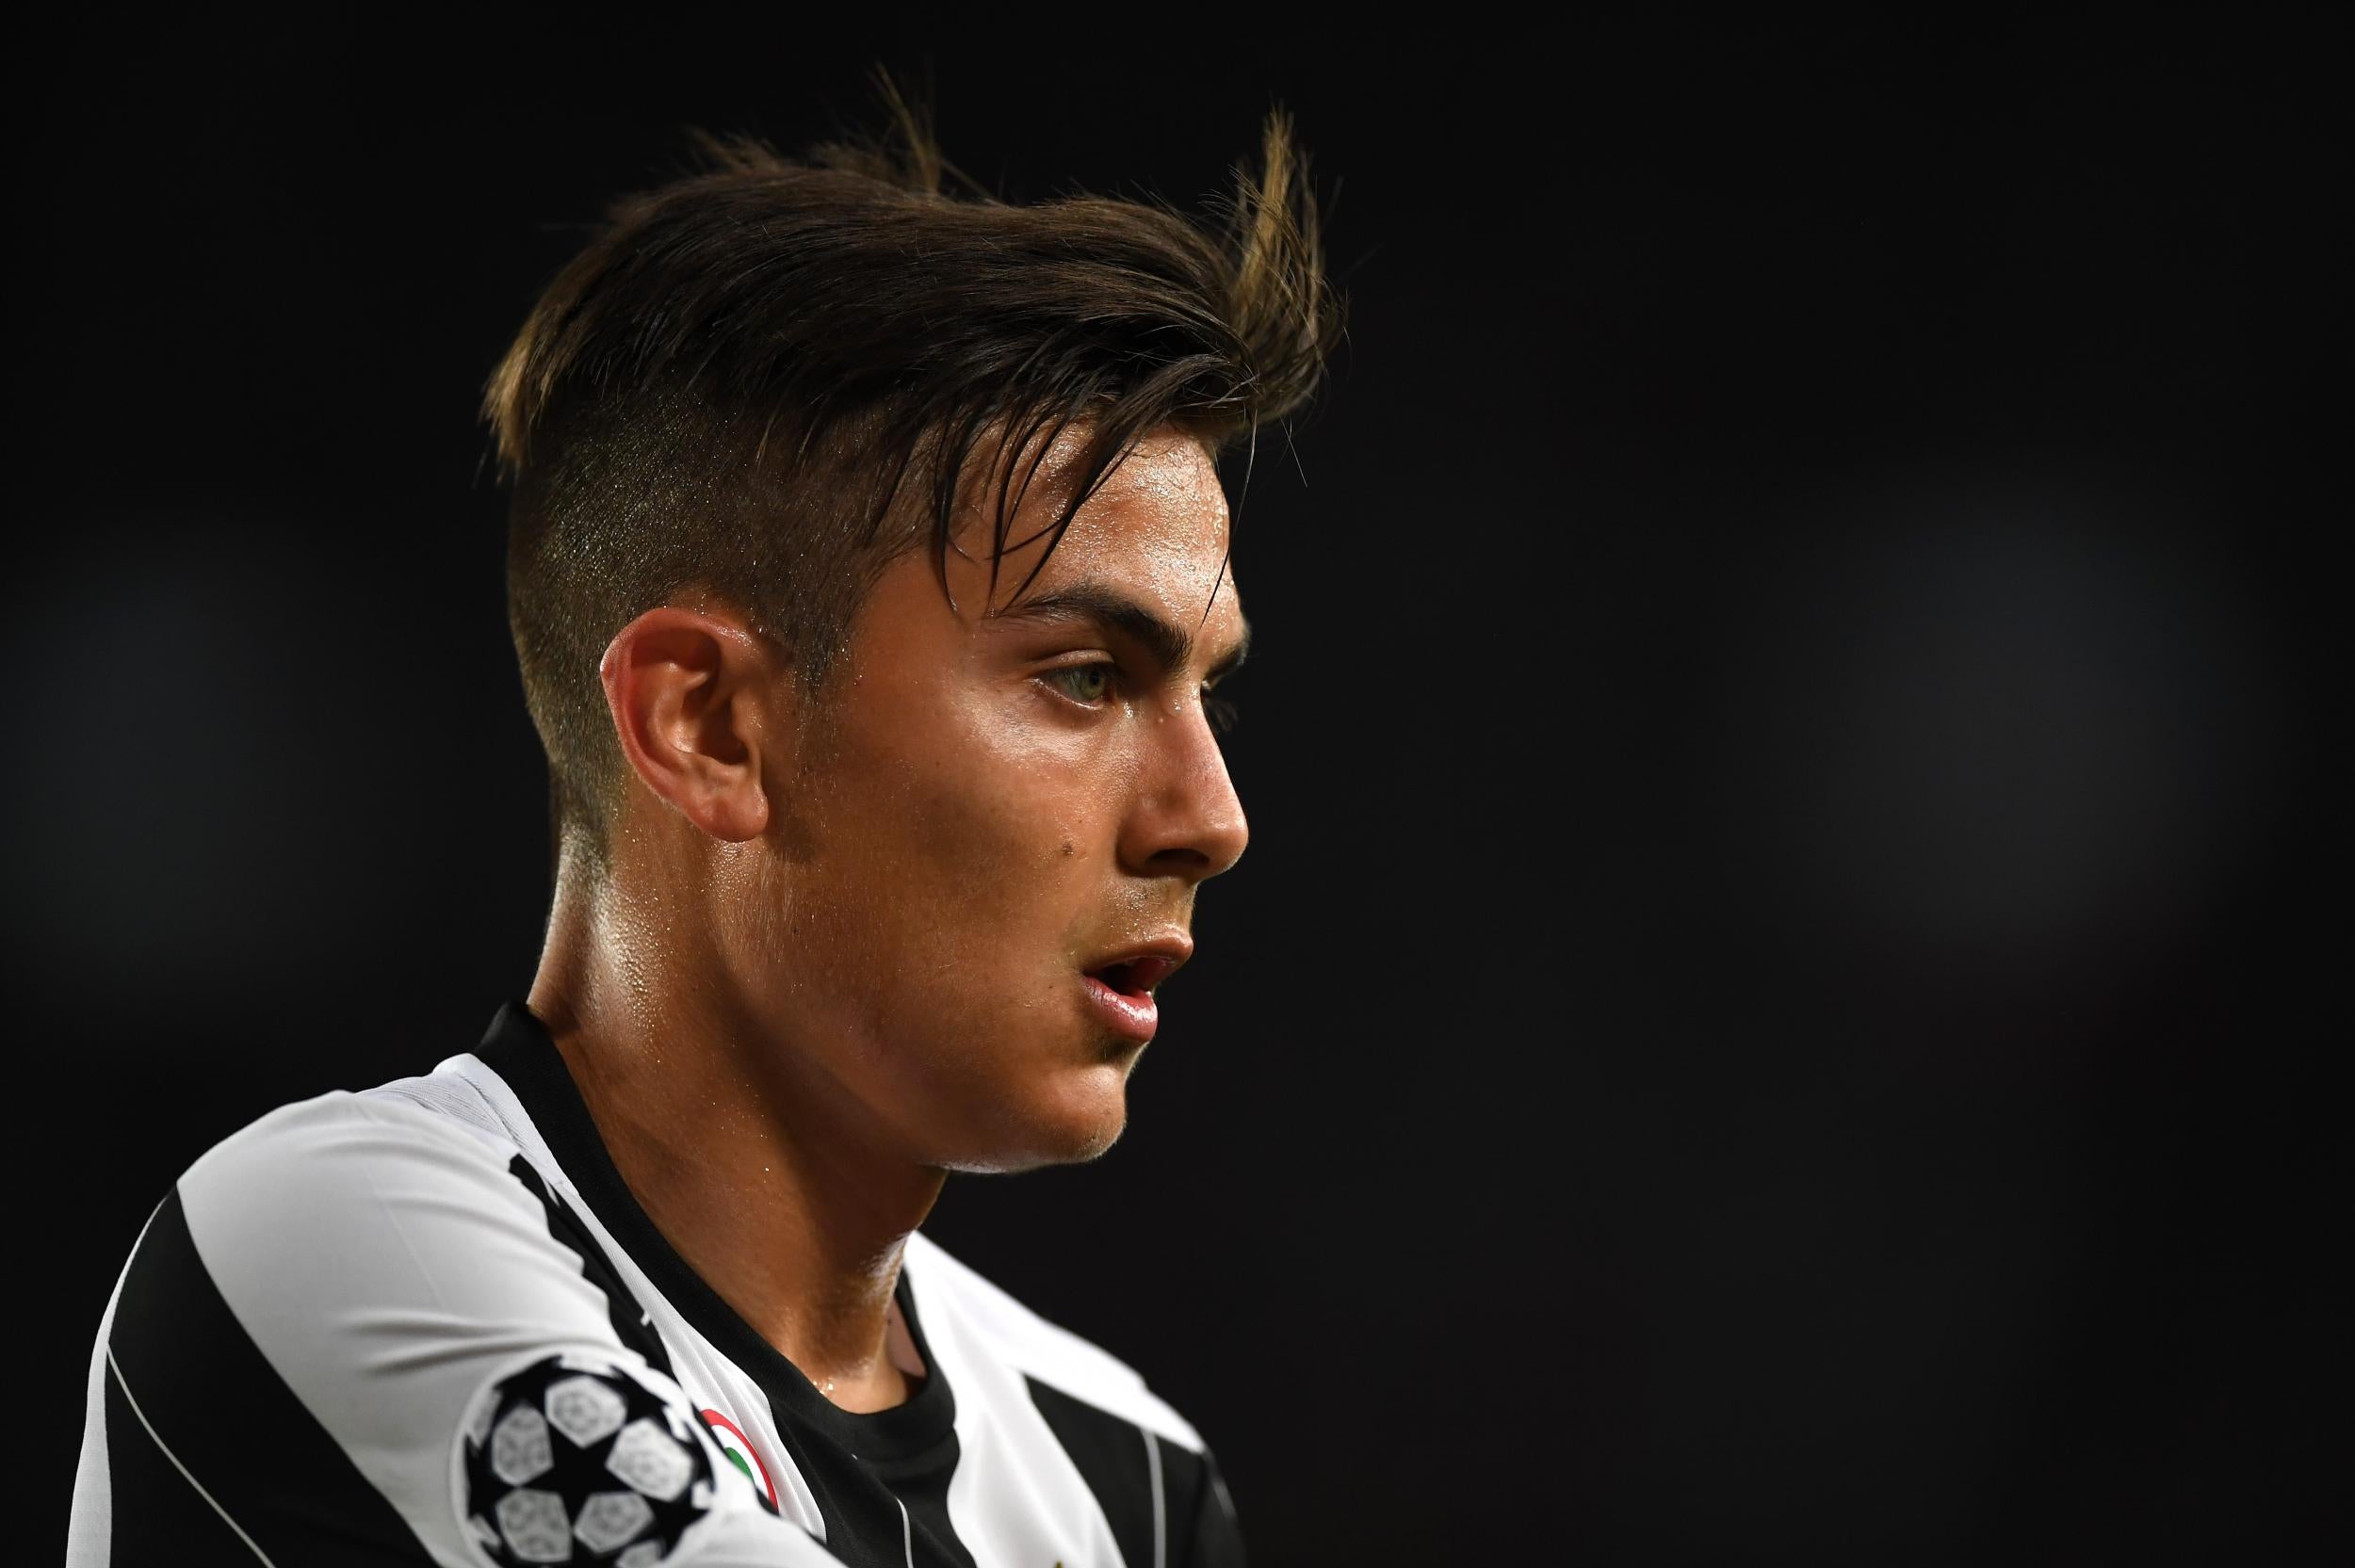 Paulo Dybala is one of the world's best young forwards